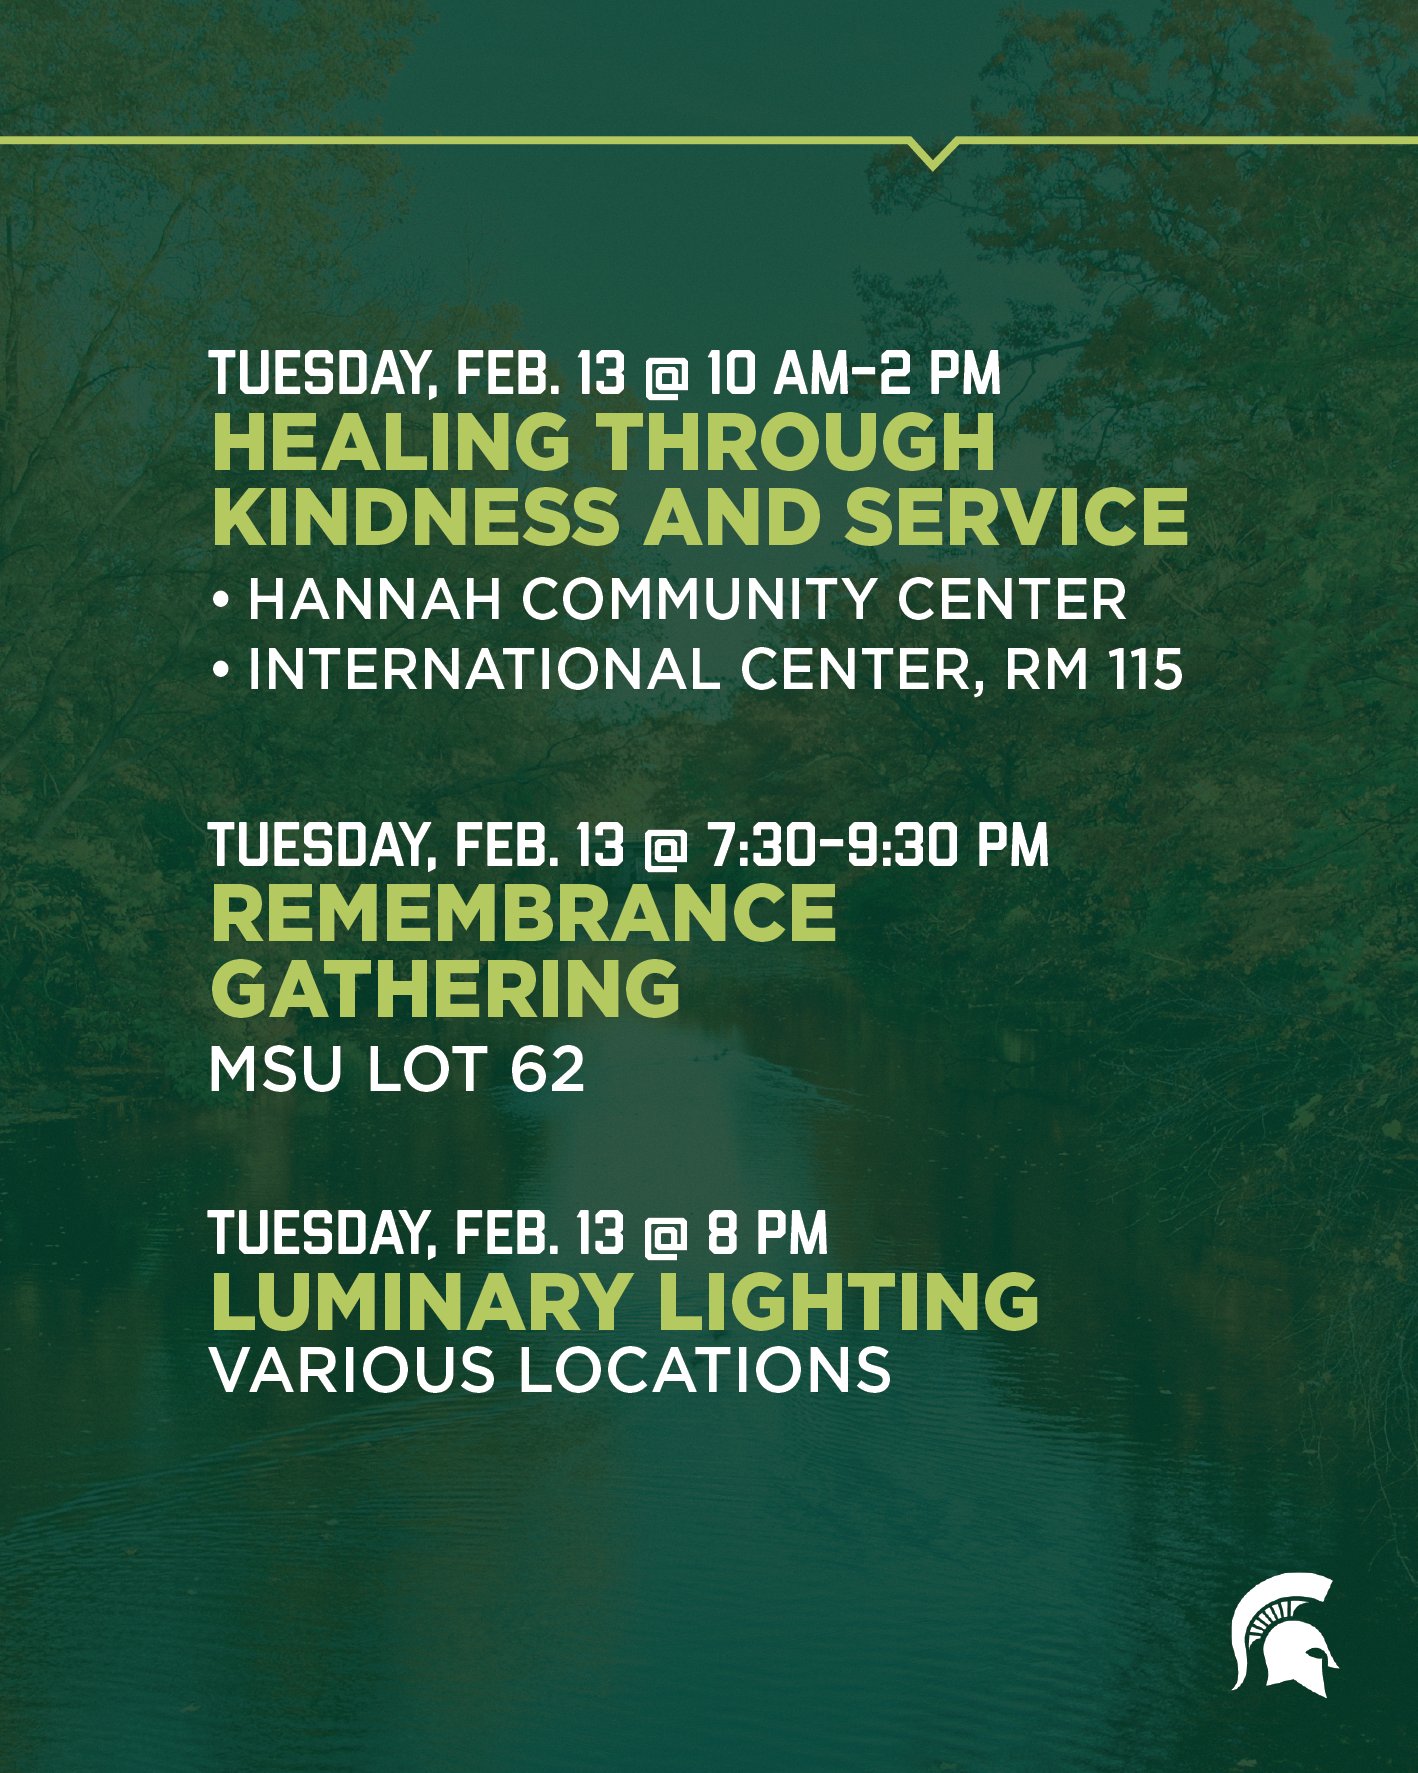 10 a.m.-2 p.m. February 13: Healing Through Kindness and Service	Hannah Community Center and International Center, Room 115   7:30-9:30 p.m. February 13 Remembrance Gathering at MSU Lot 62  And 8 p.m. February 13 Luminary Lighting Various locations